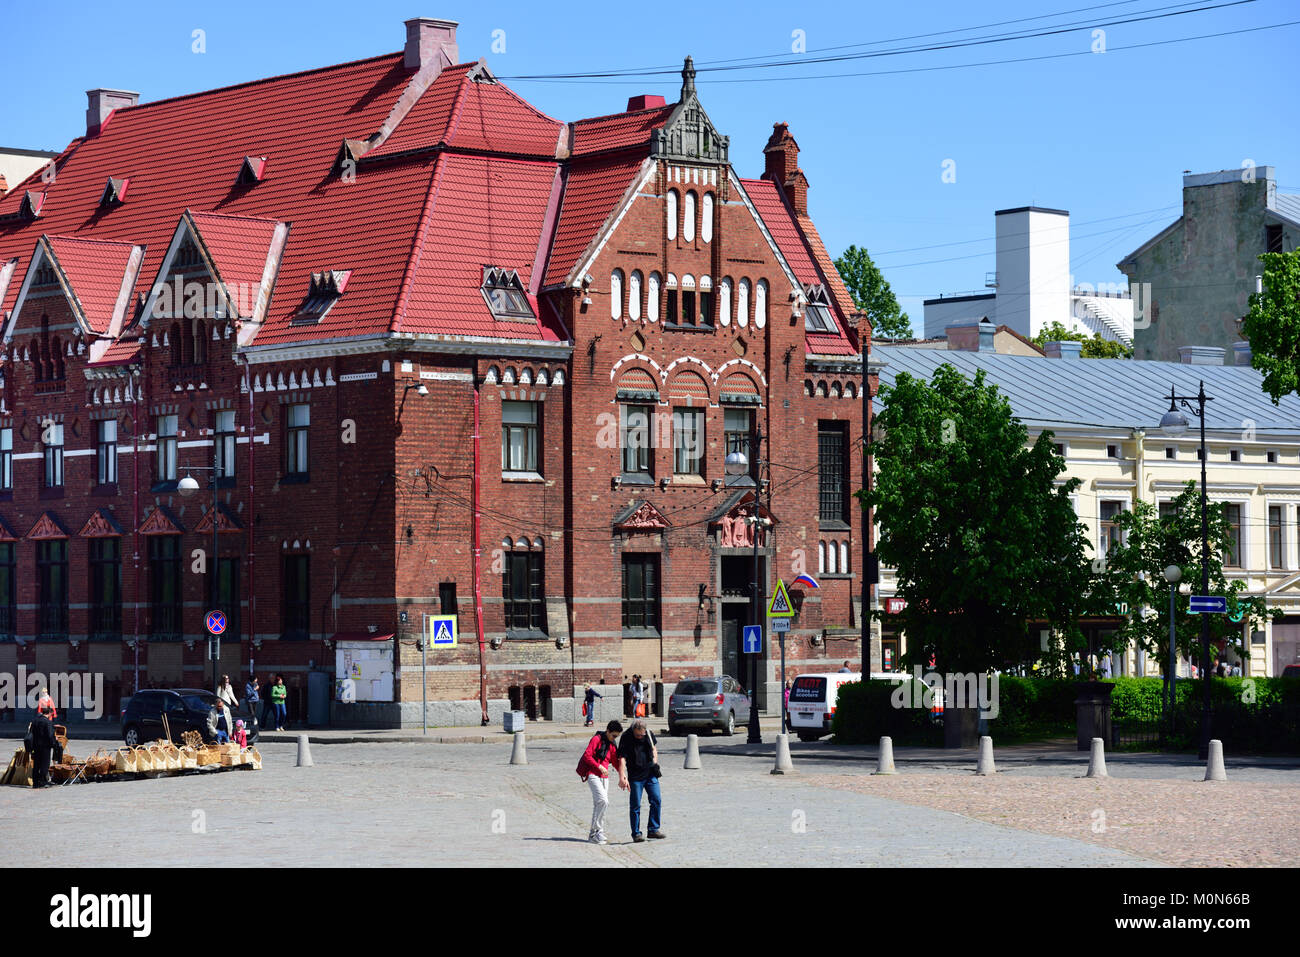 Vyborg, Leningrad oblast, Russia - June 06, 2015: People at the building of Suomen Pankki on the Lenin avenue. Built in 1910 by design of Carl Gustaf  Stock Photo